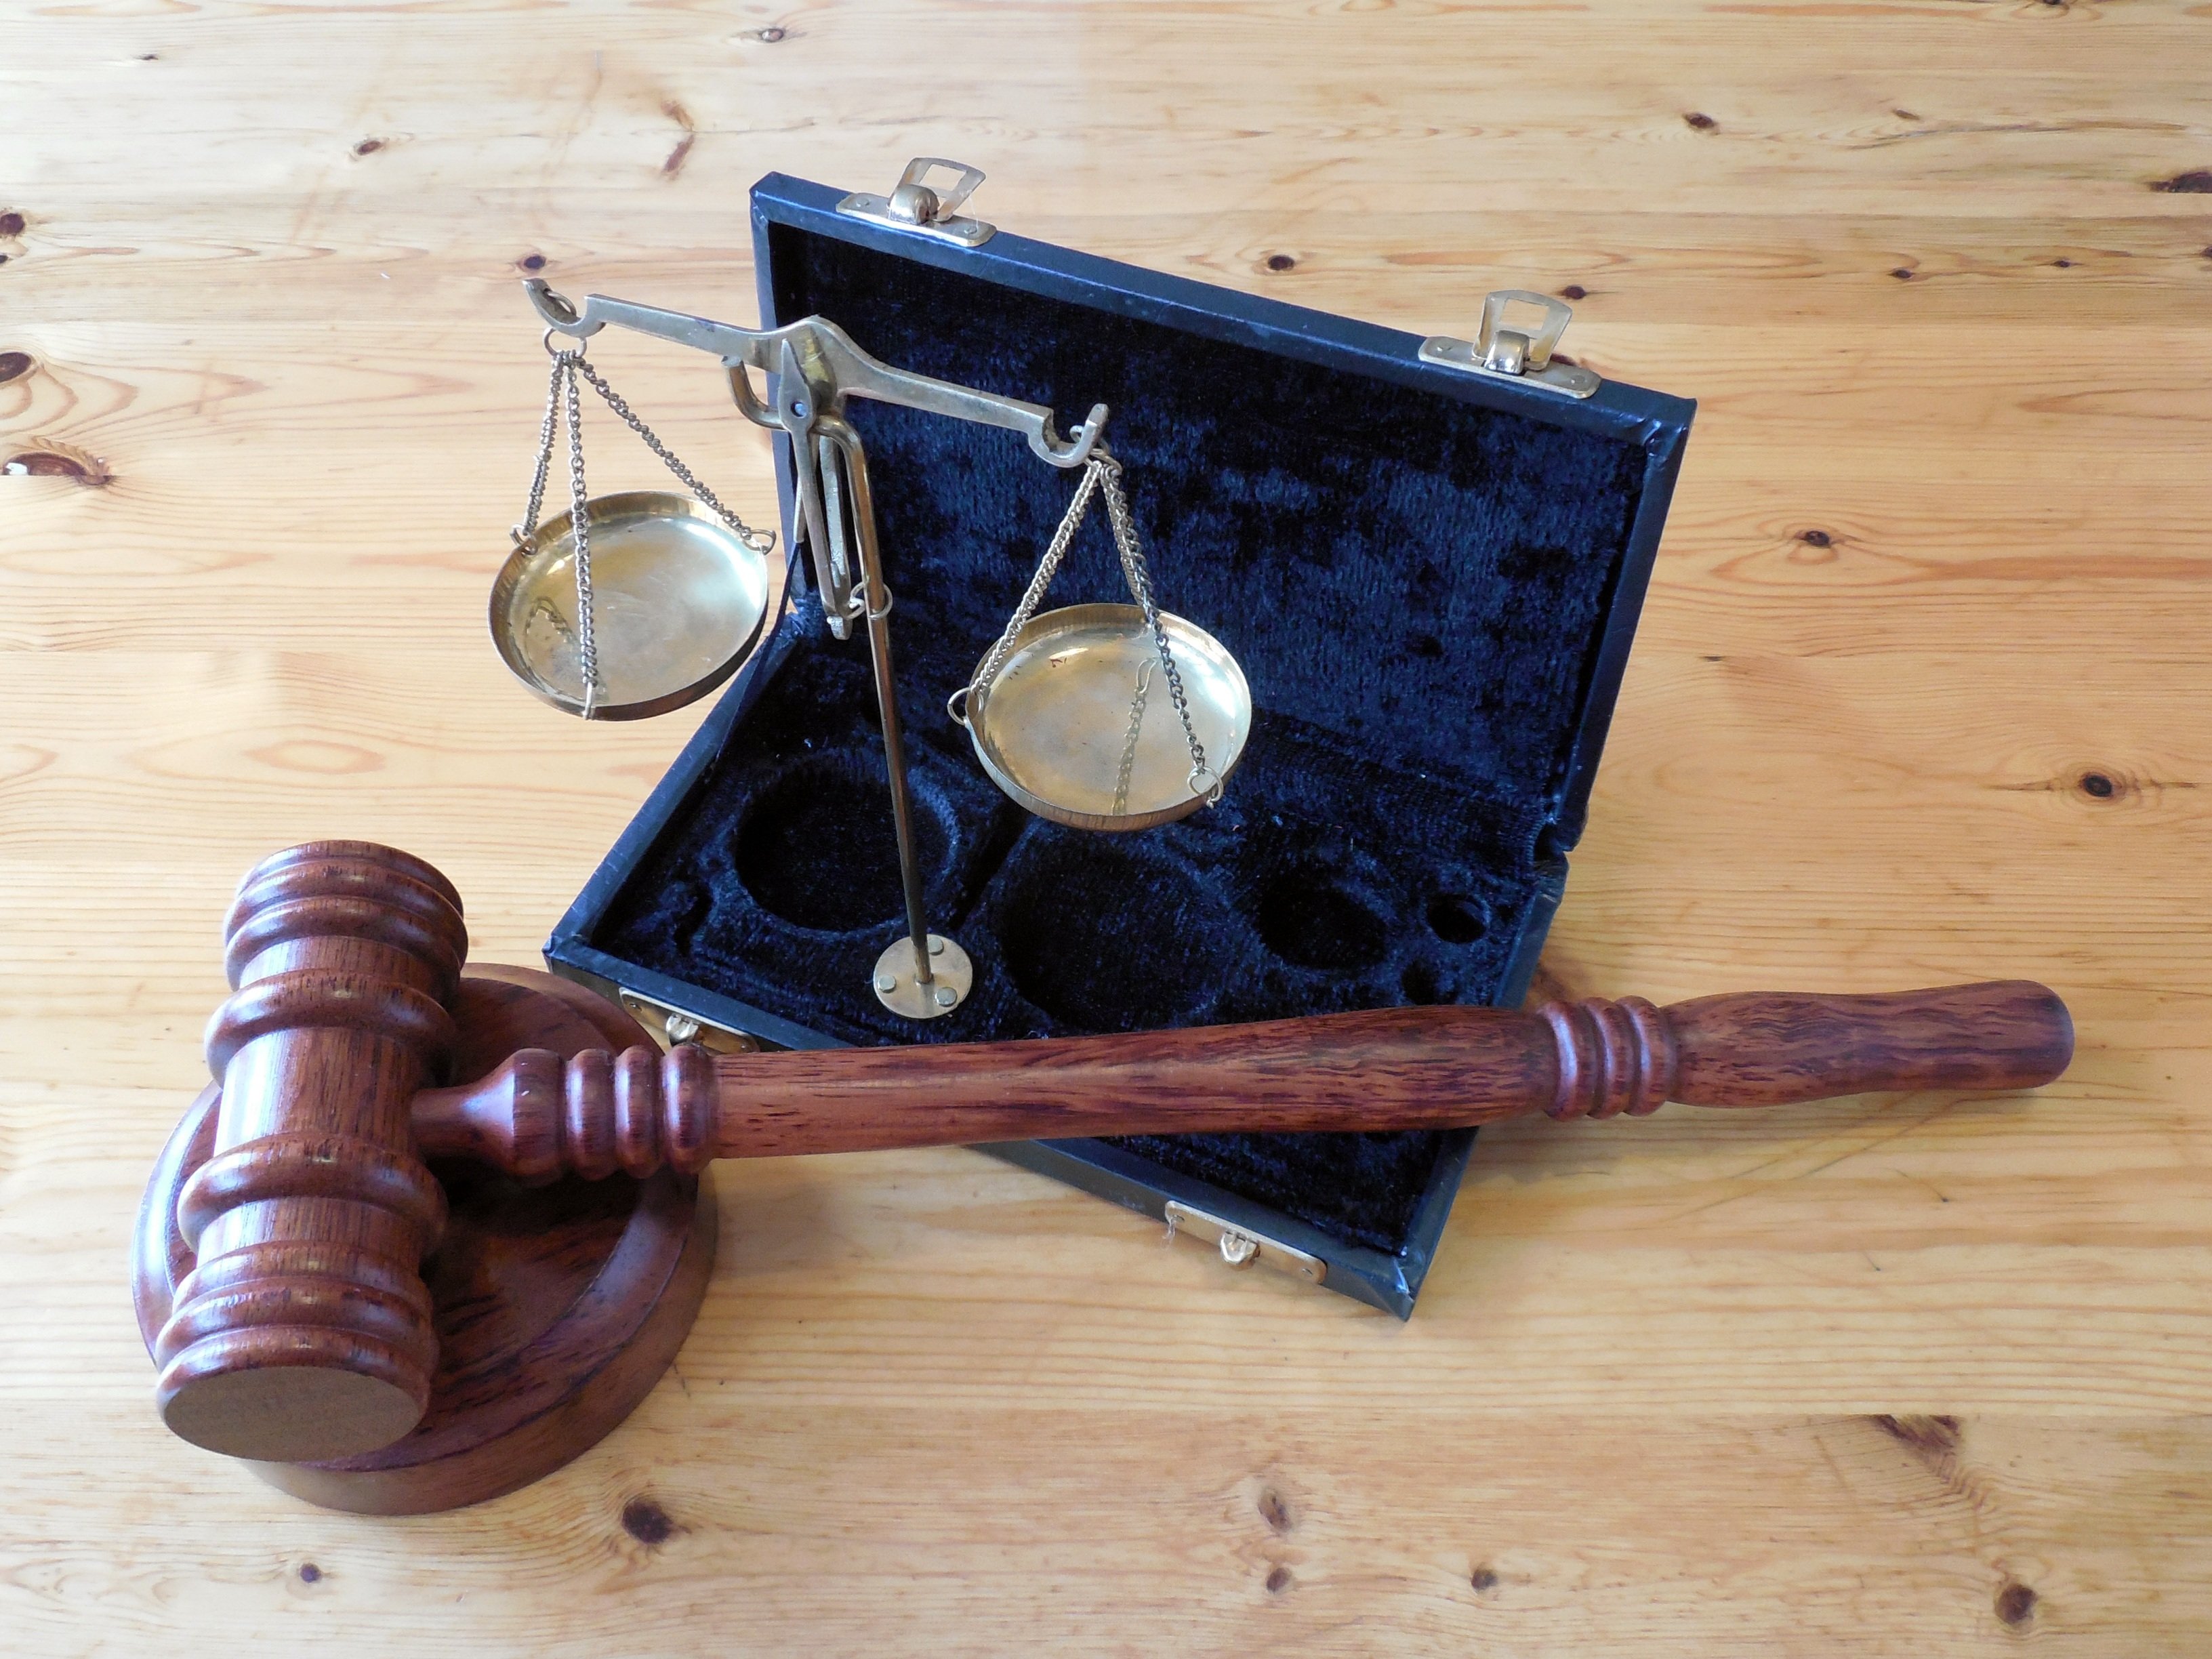 Scales of justice and a gavel on a desk